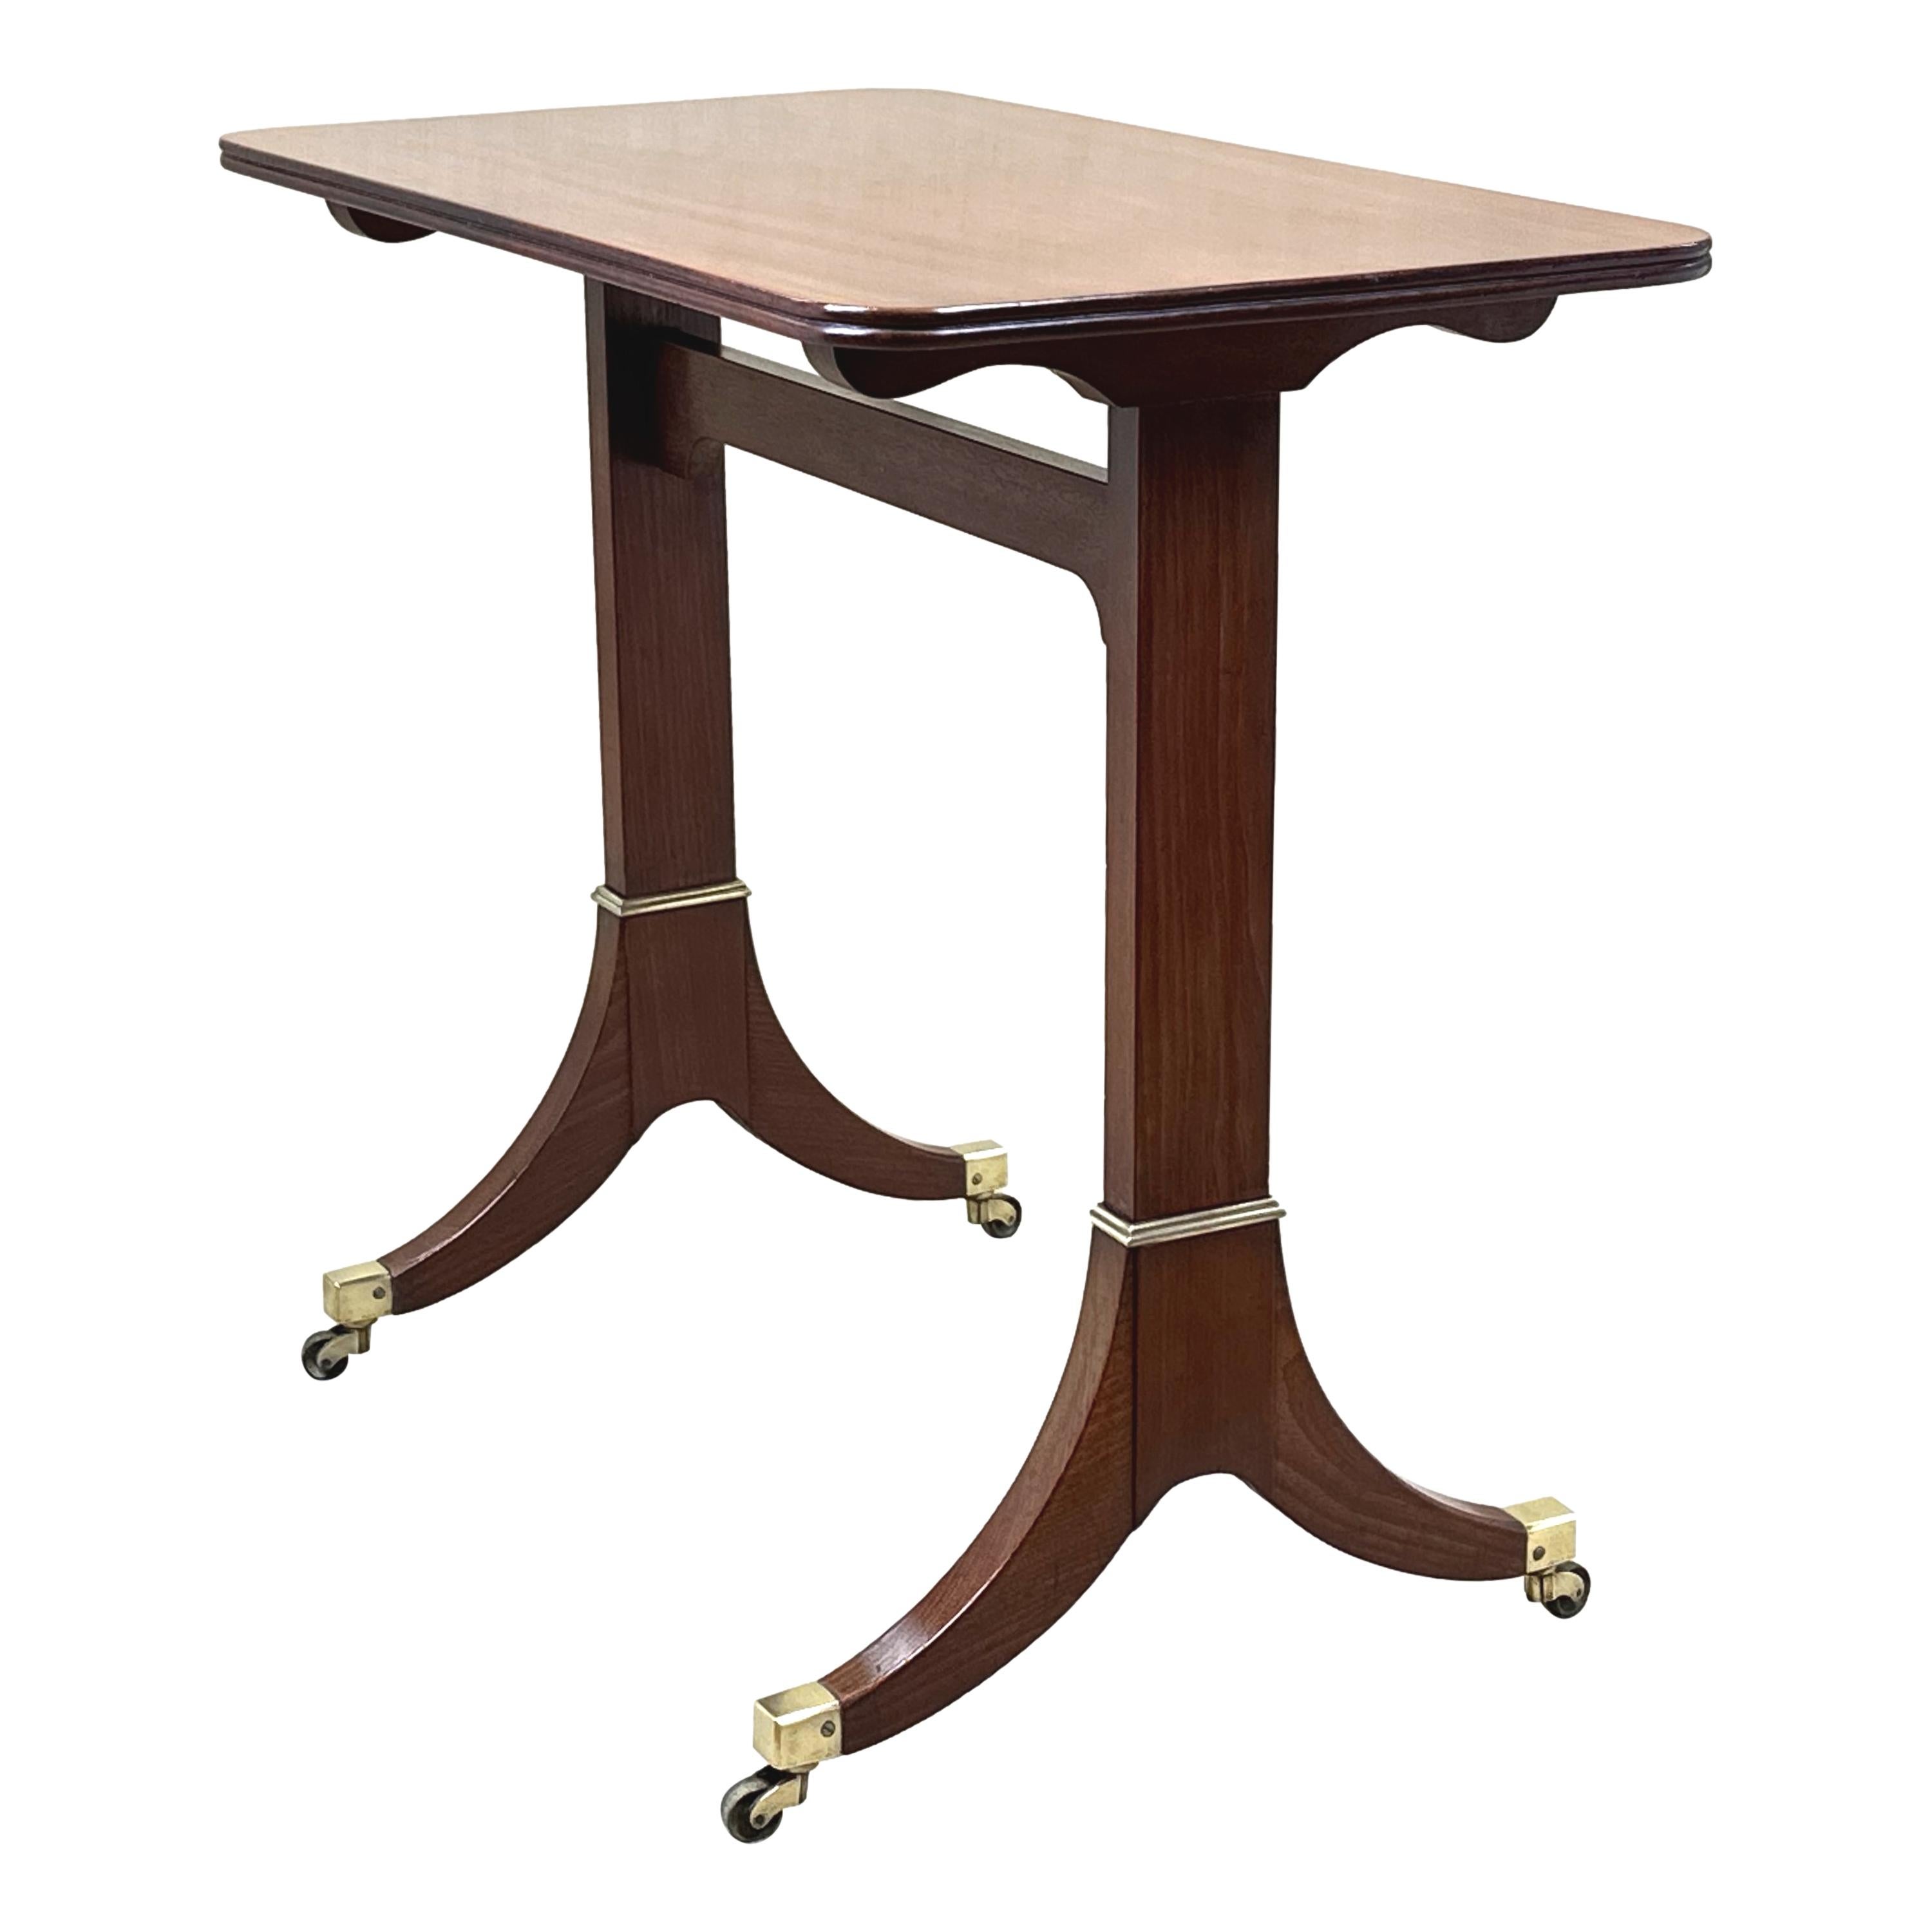 A Fine Quality Early 19th Century, George III Period, Mahogany Library Table Of Unusually Small Proportions, Having Well Figured Rectangular Top With Elegant Tablet End Supports, United By High Stretcher, With Attractive Brass Moulded Decoration And